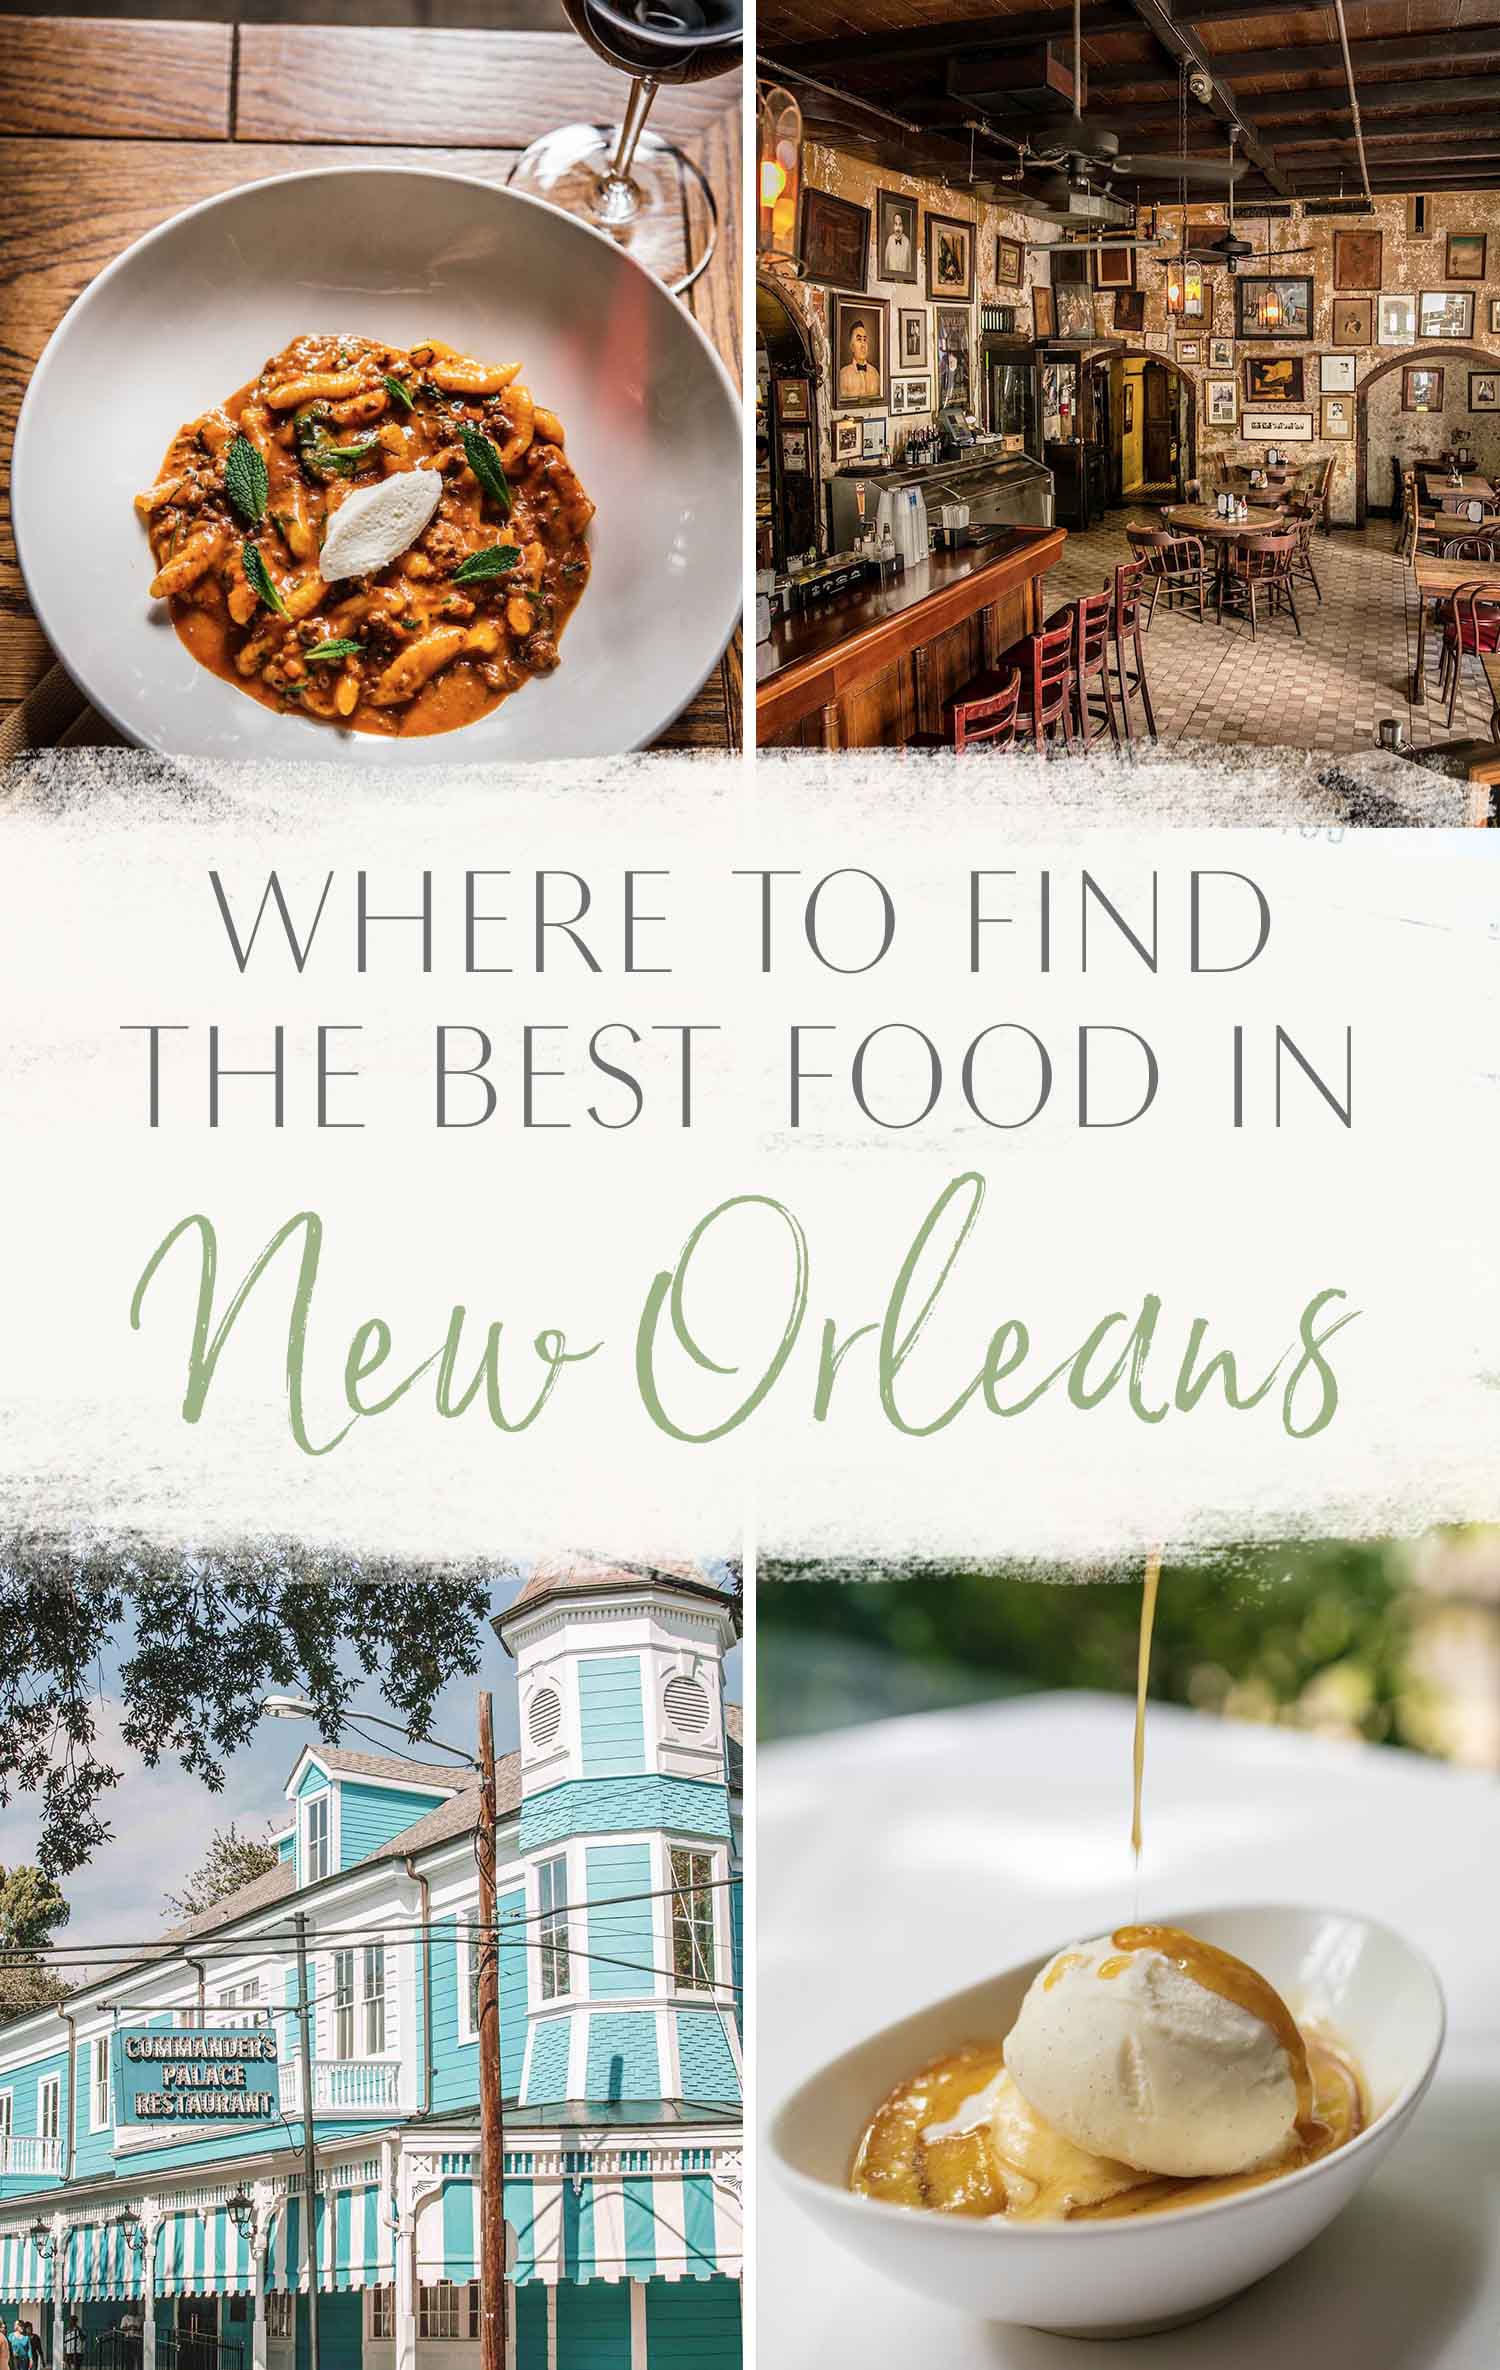 Best Indian Food New Orleans: Discover the Culinary Delights of the Big Easy!